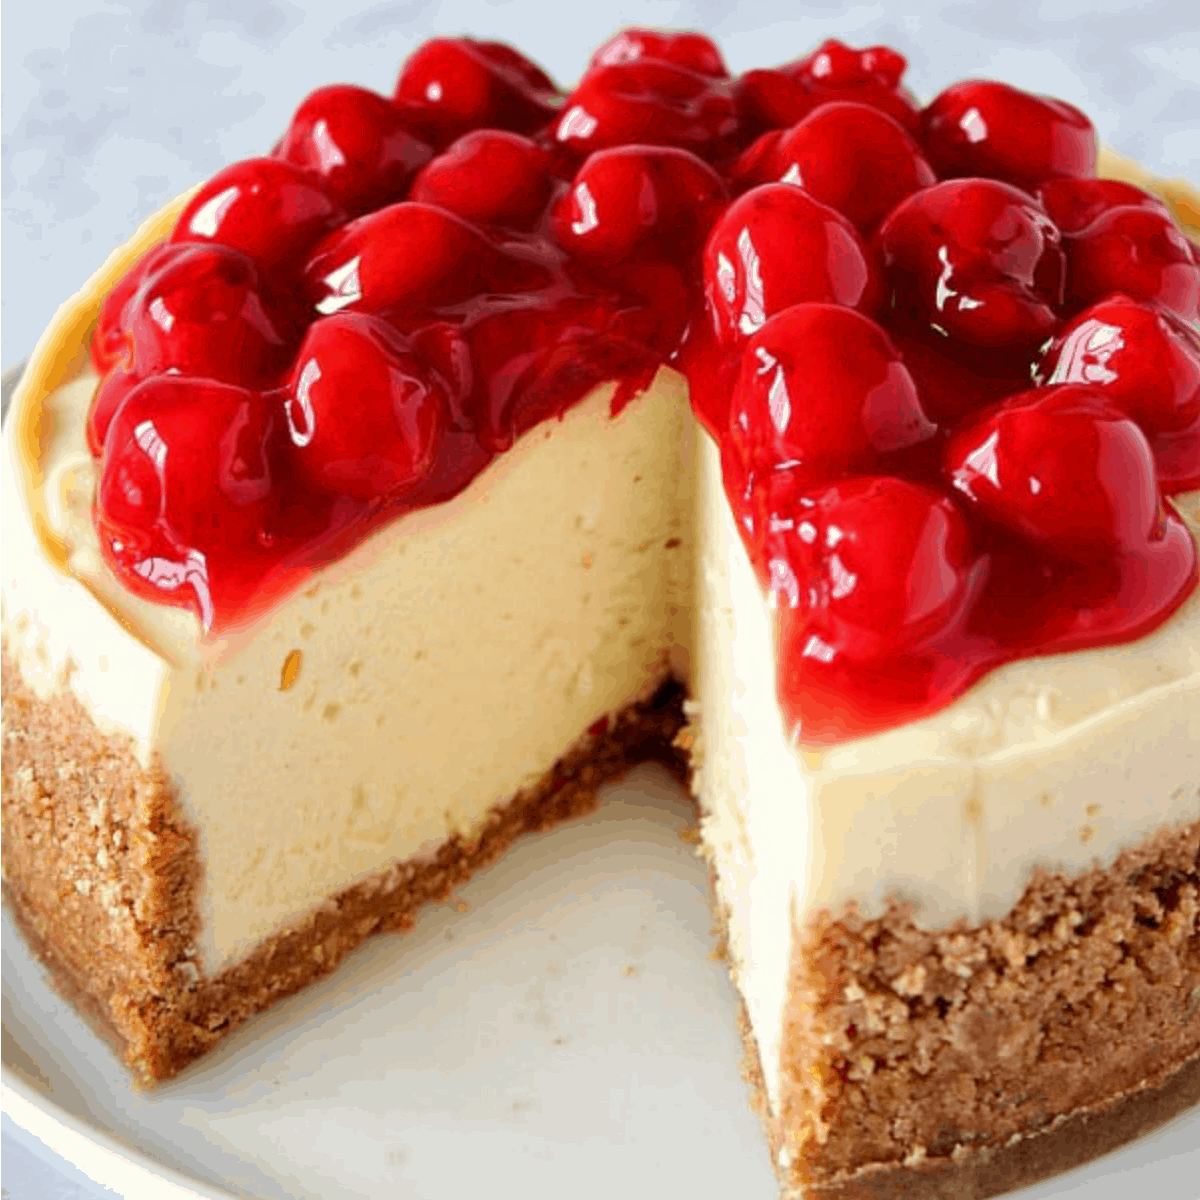 Cheesecake with cherry topping on a plate.